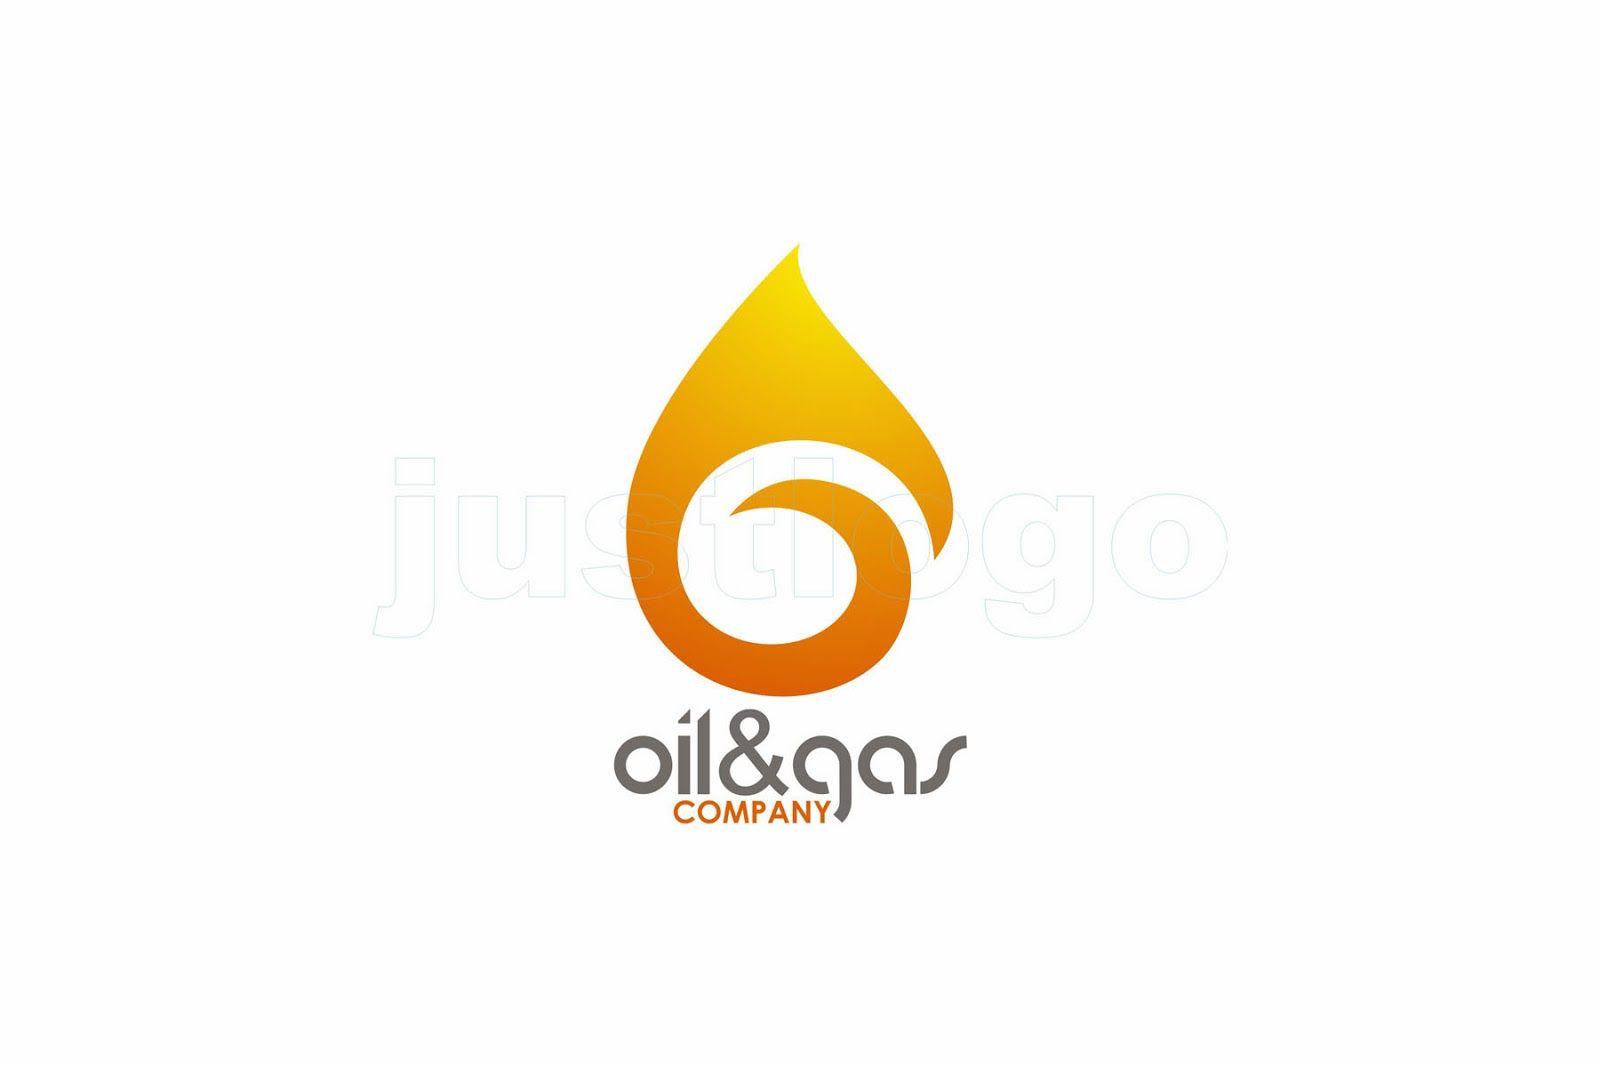 Total Oil Company Logo - Oil and gas company Logos